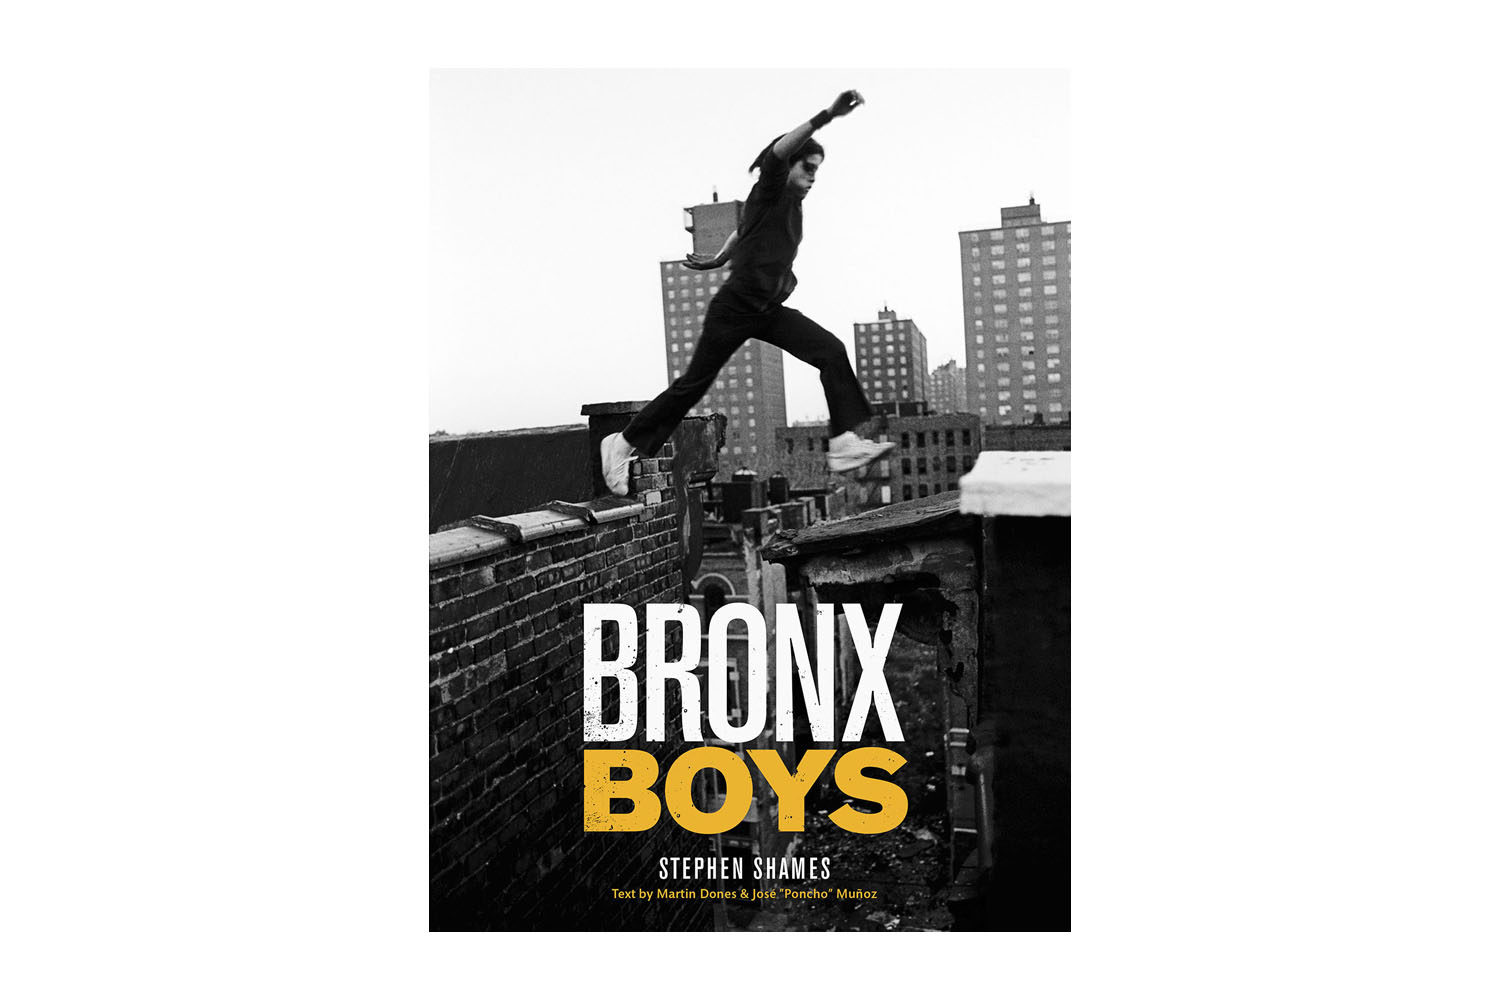 Stephen Shames' Bronx Boys,  published by the University of Texas Press
                              A project that began as a 1977 assignment for Look Magazine, Stephen Shames documents the lives of young men and their daily existence in the  terrible beauty  of the Bronx.